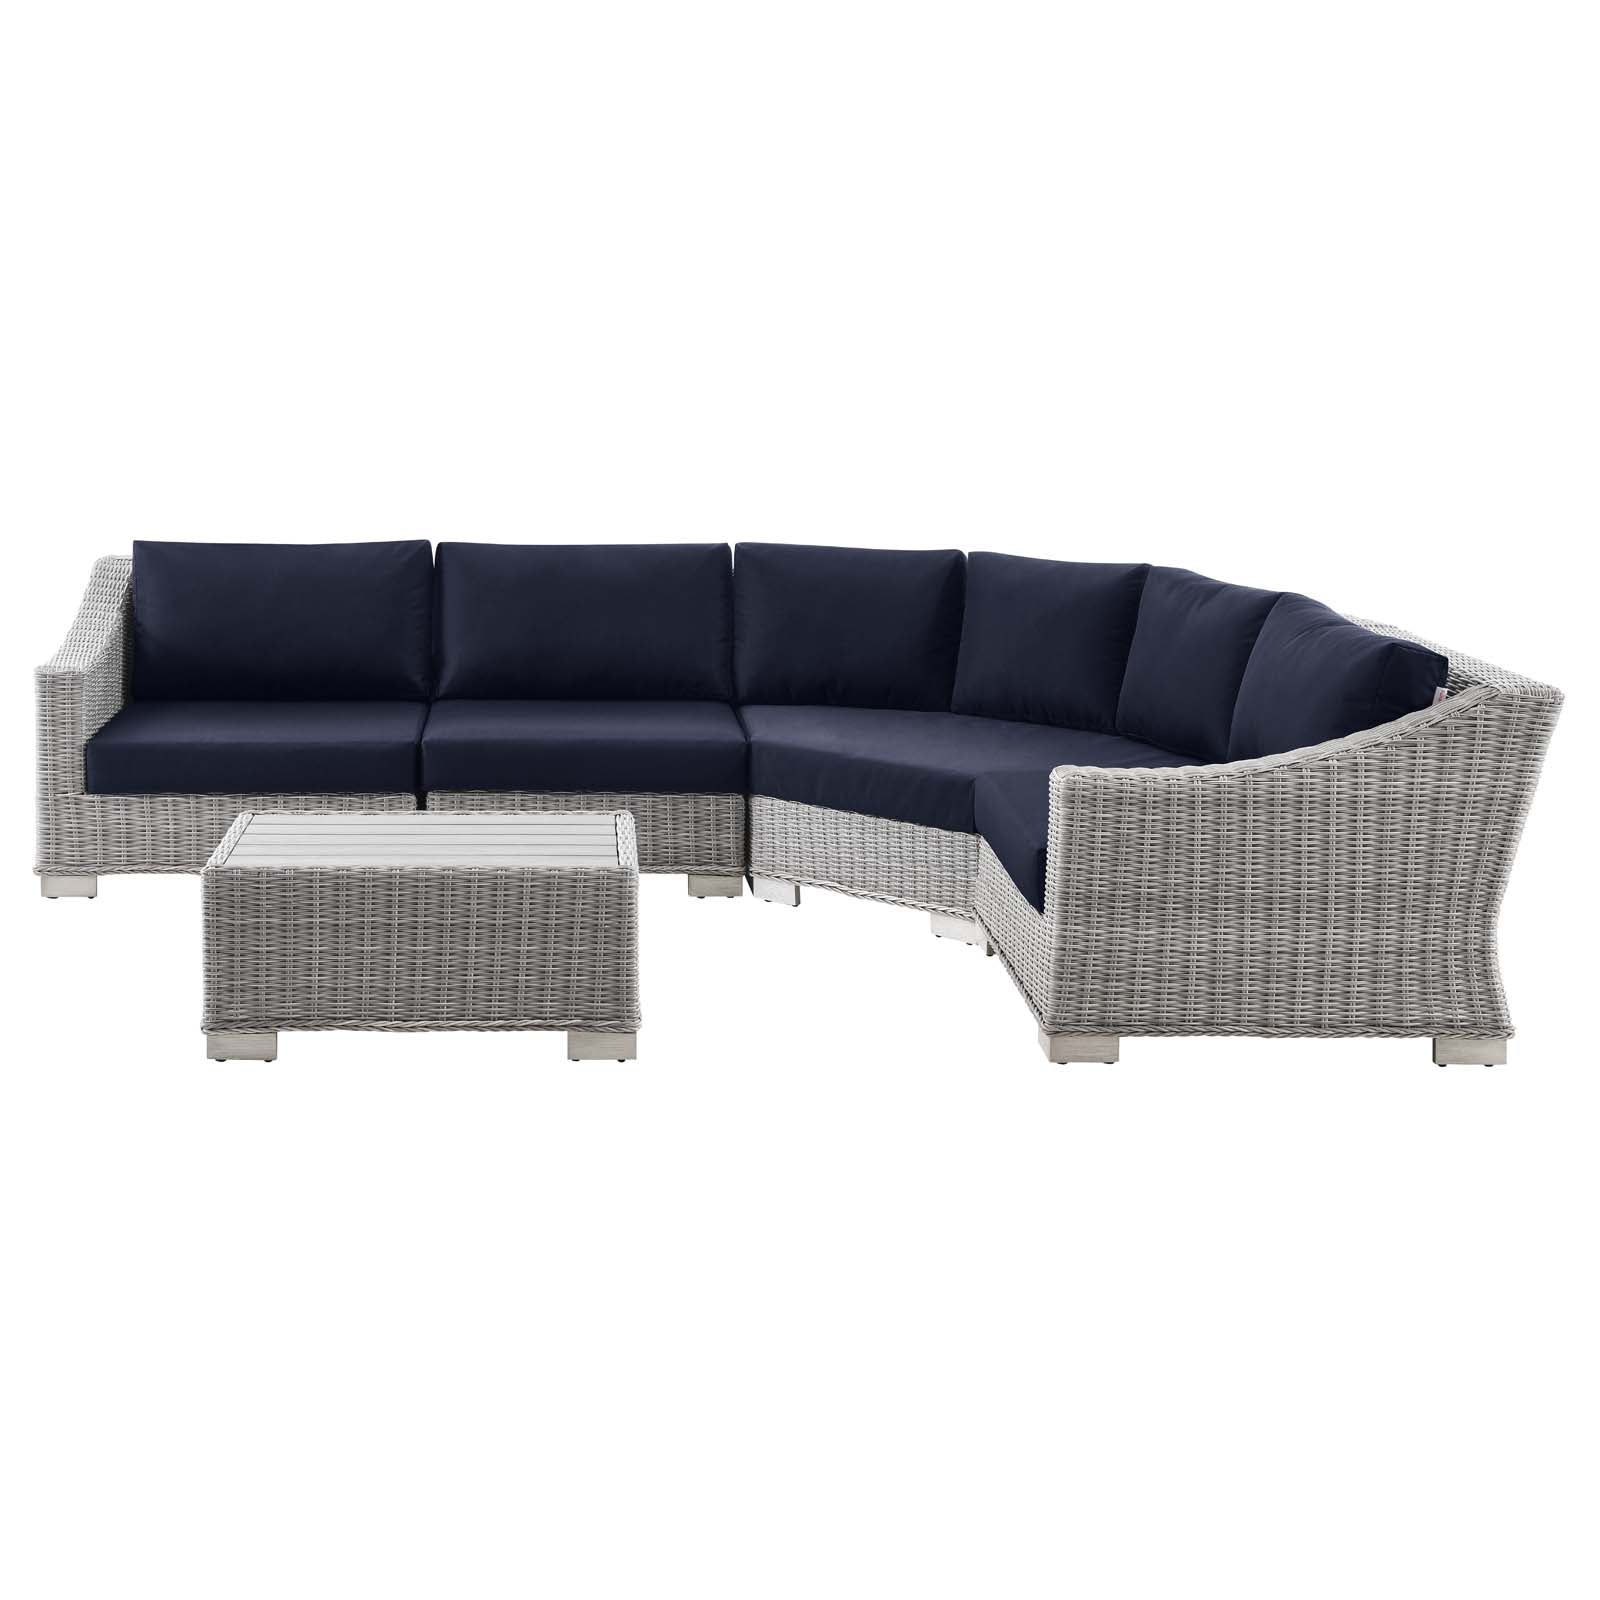 Modway Outdoor Conversation Sets - Conway Outdoor Patio Wicker Rattan 5 Piece Sectional Sofa Furniture Set Light Gray Navy